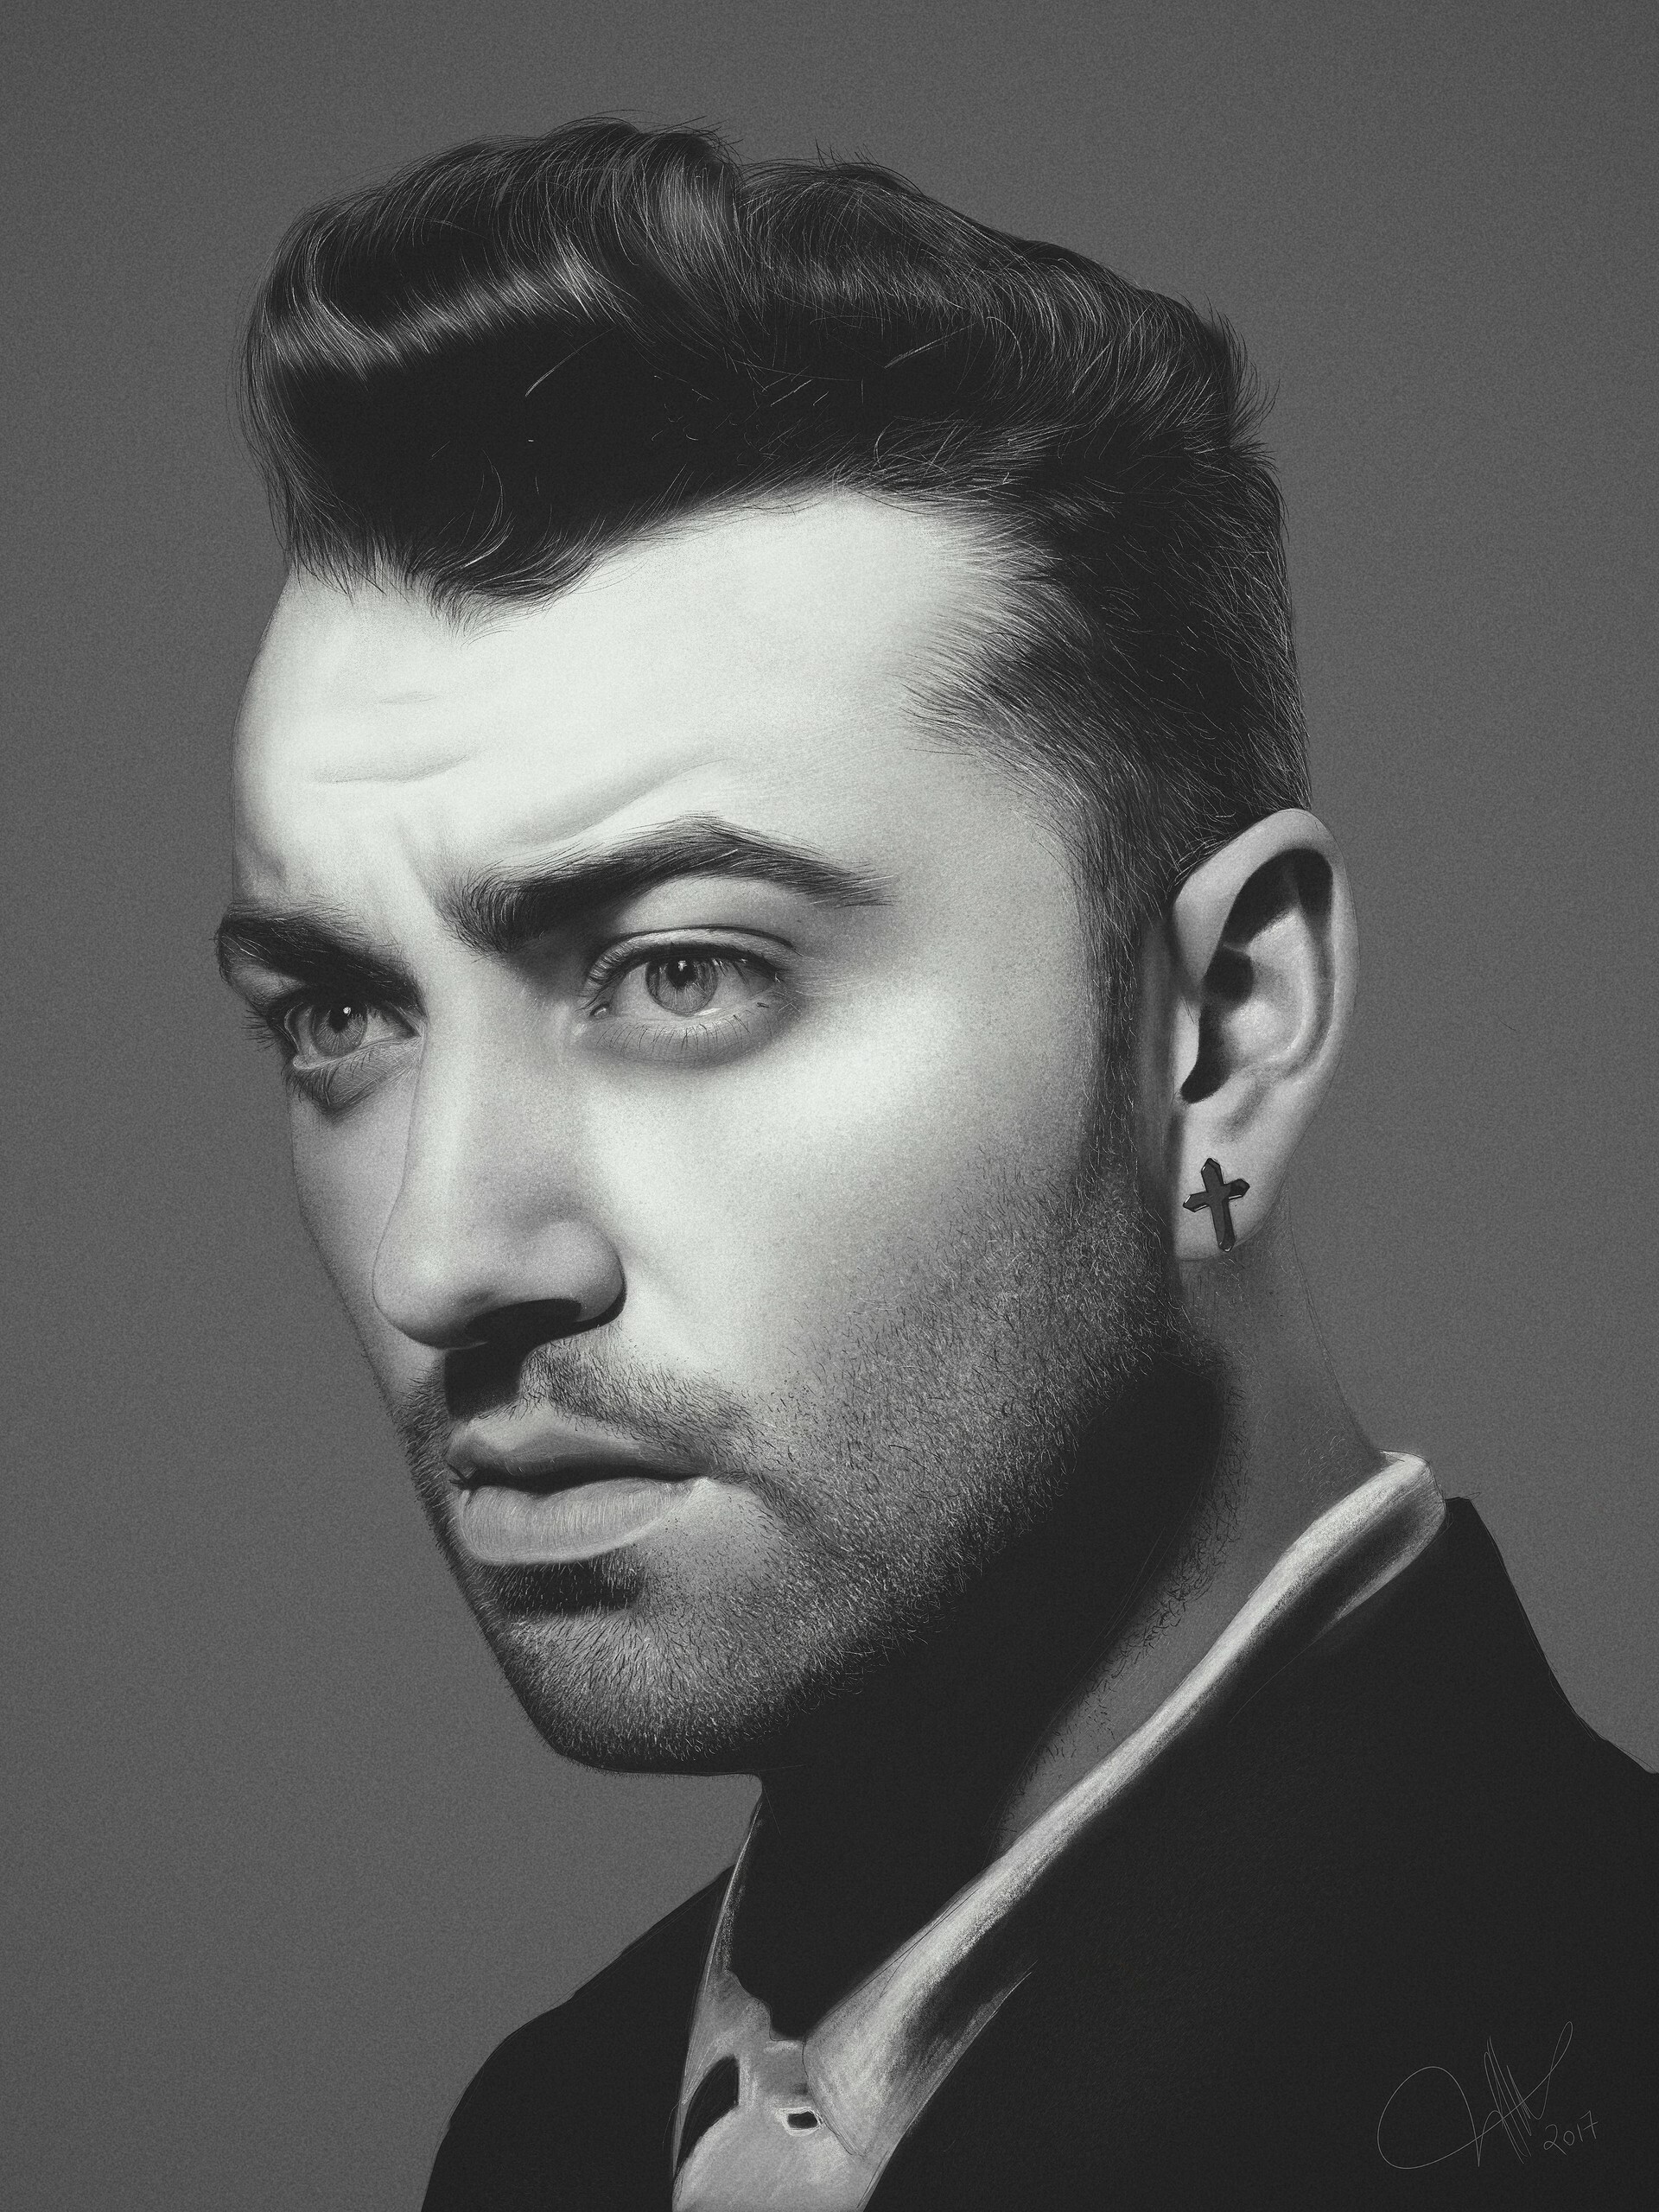 Sam Smith: The single, "I'm Not the Only One", was released on 31 August 2014. 1920x2560 HD Wallpaper.